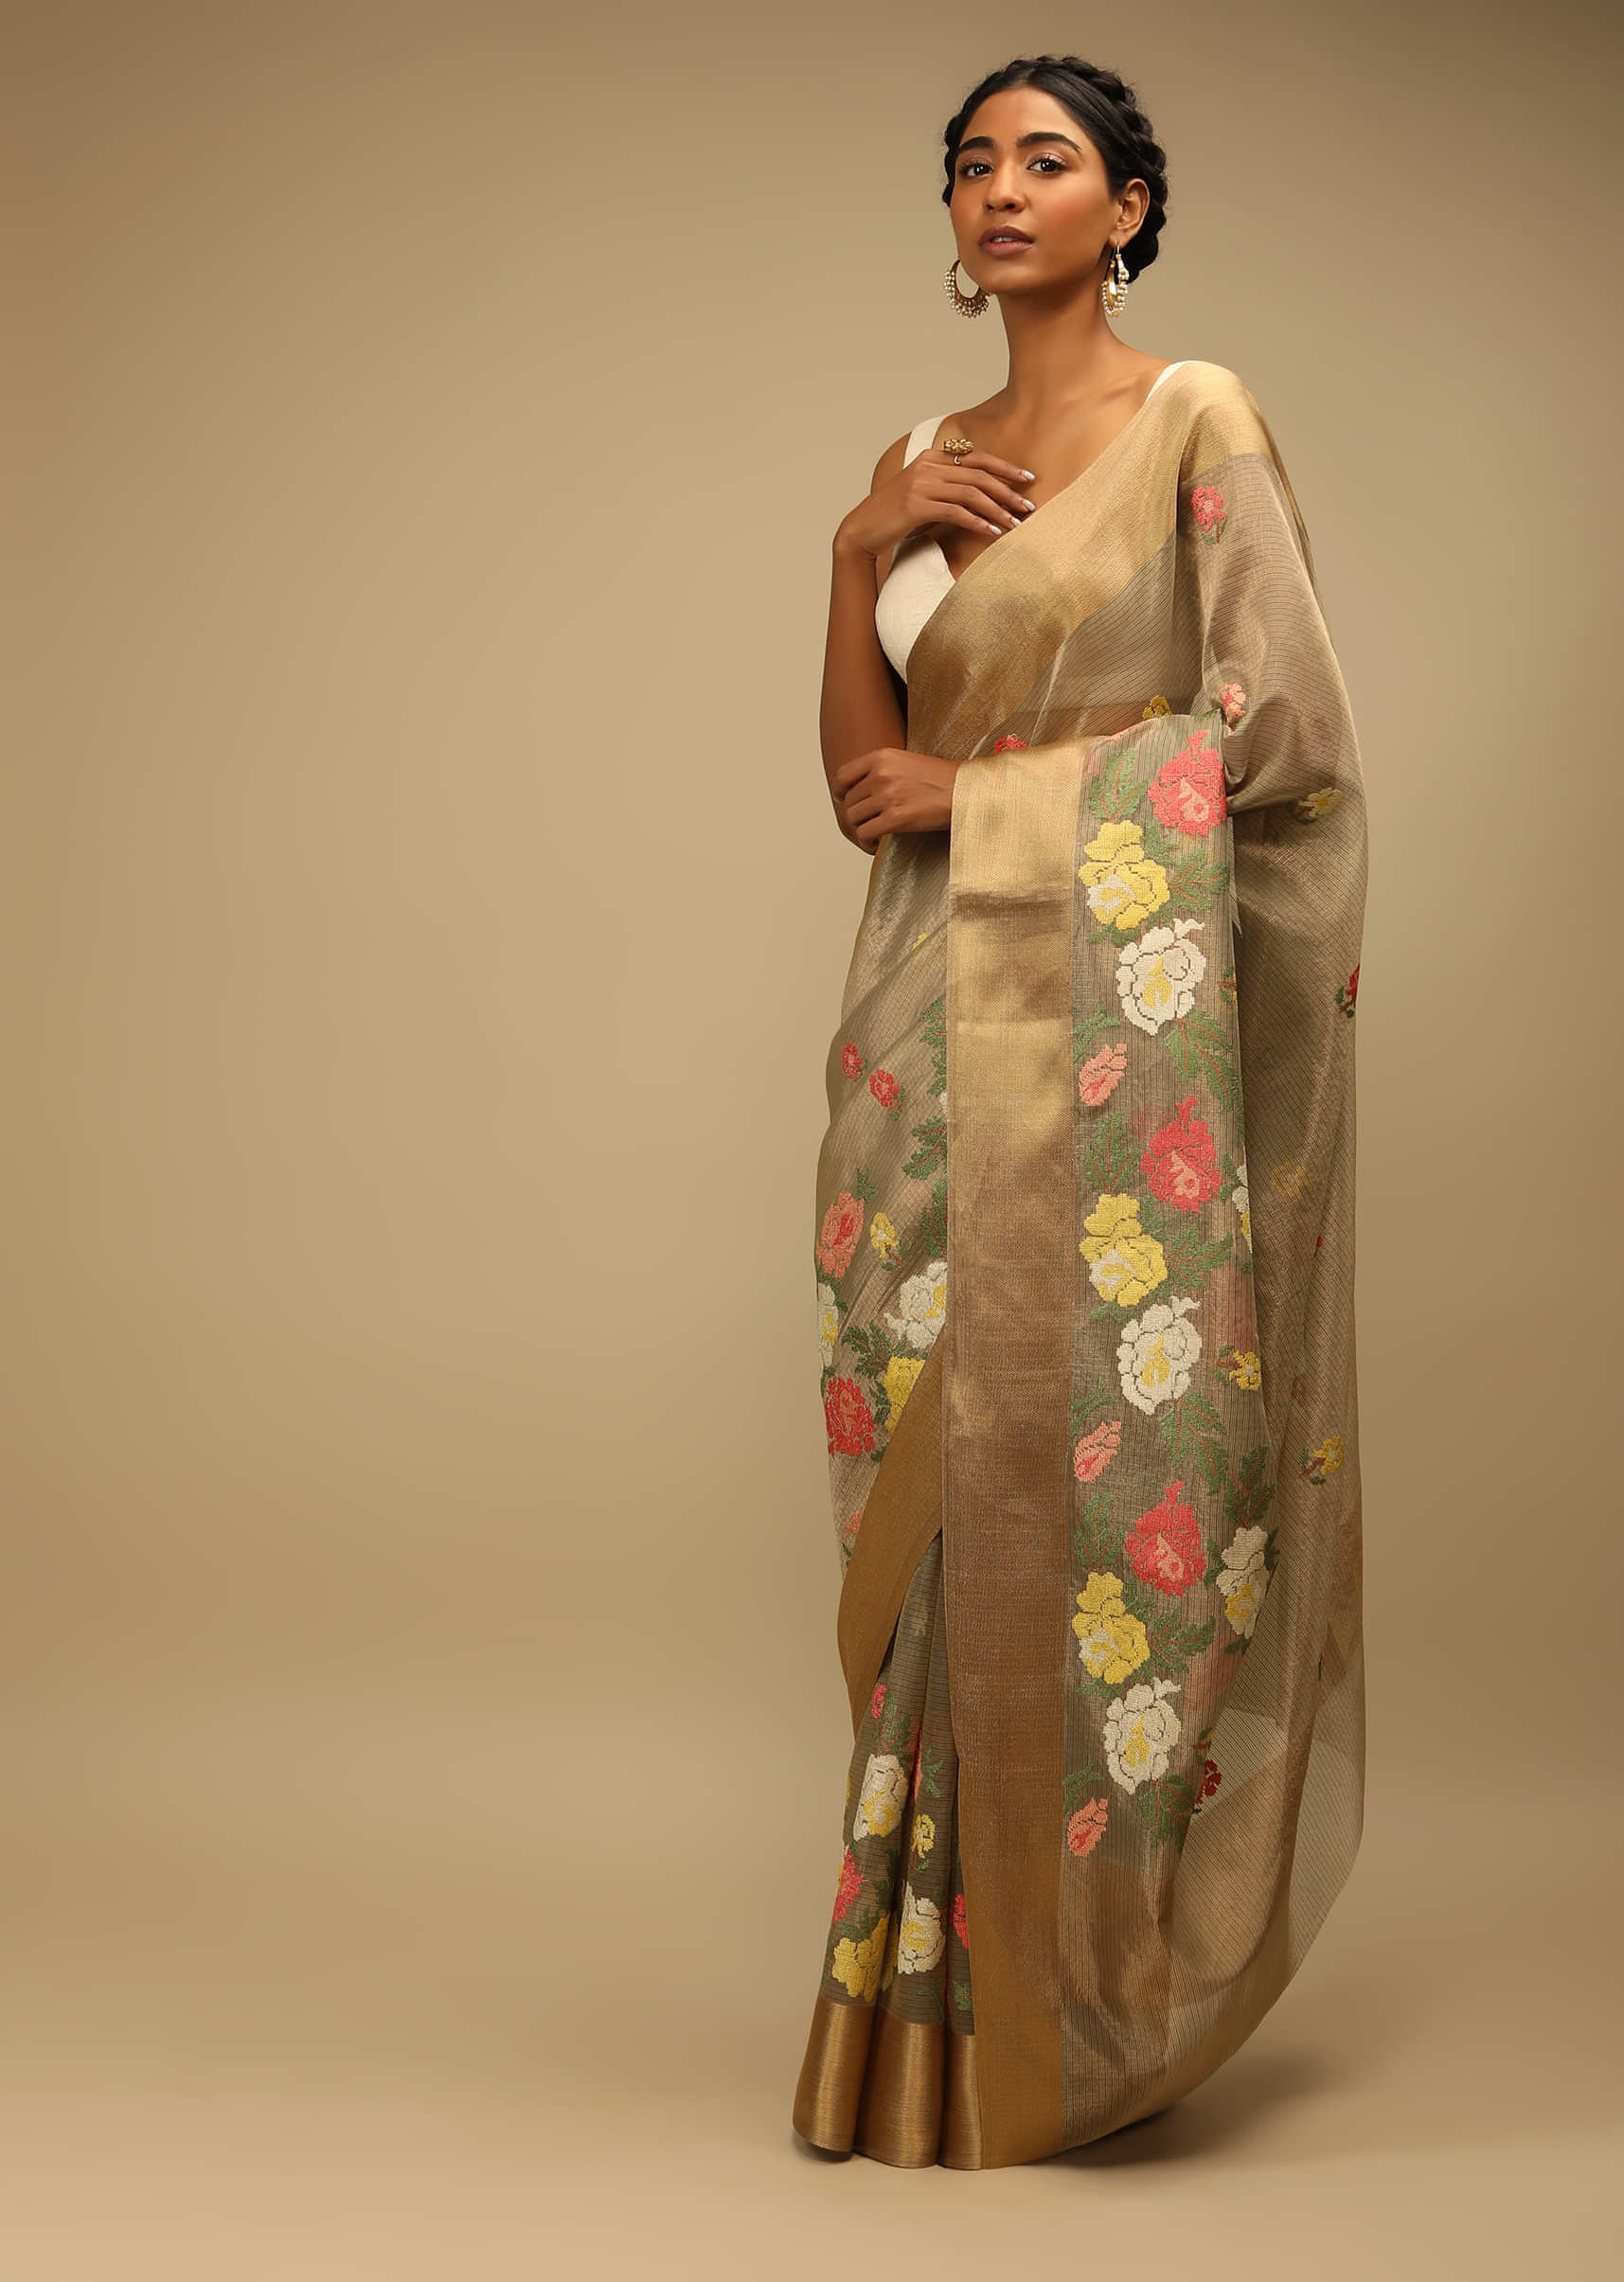 Croissant Gold Saree In Zari Kota Silk With Multi Colored Resham Embroidered Flowers On The Border 